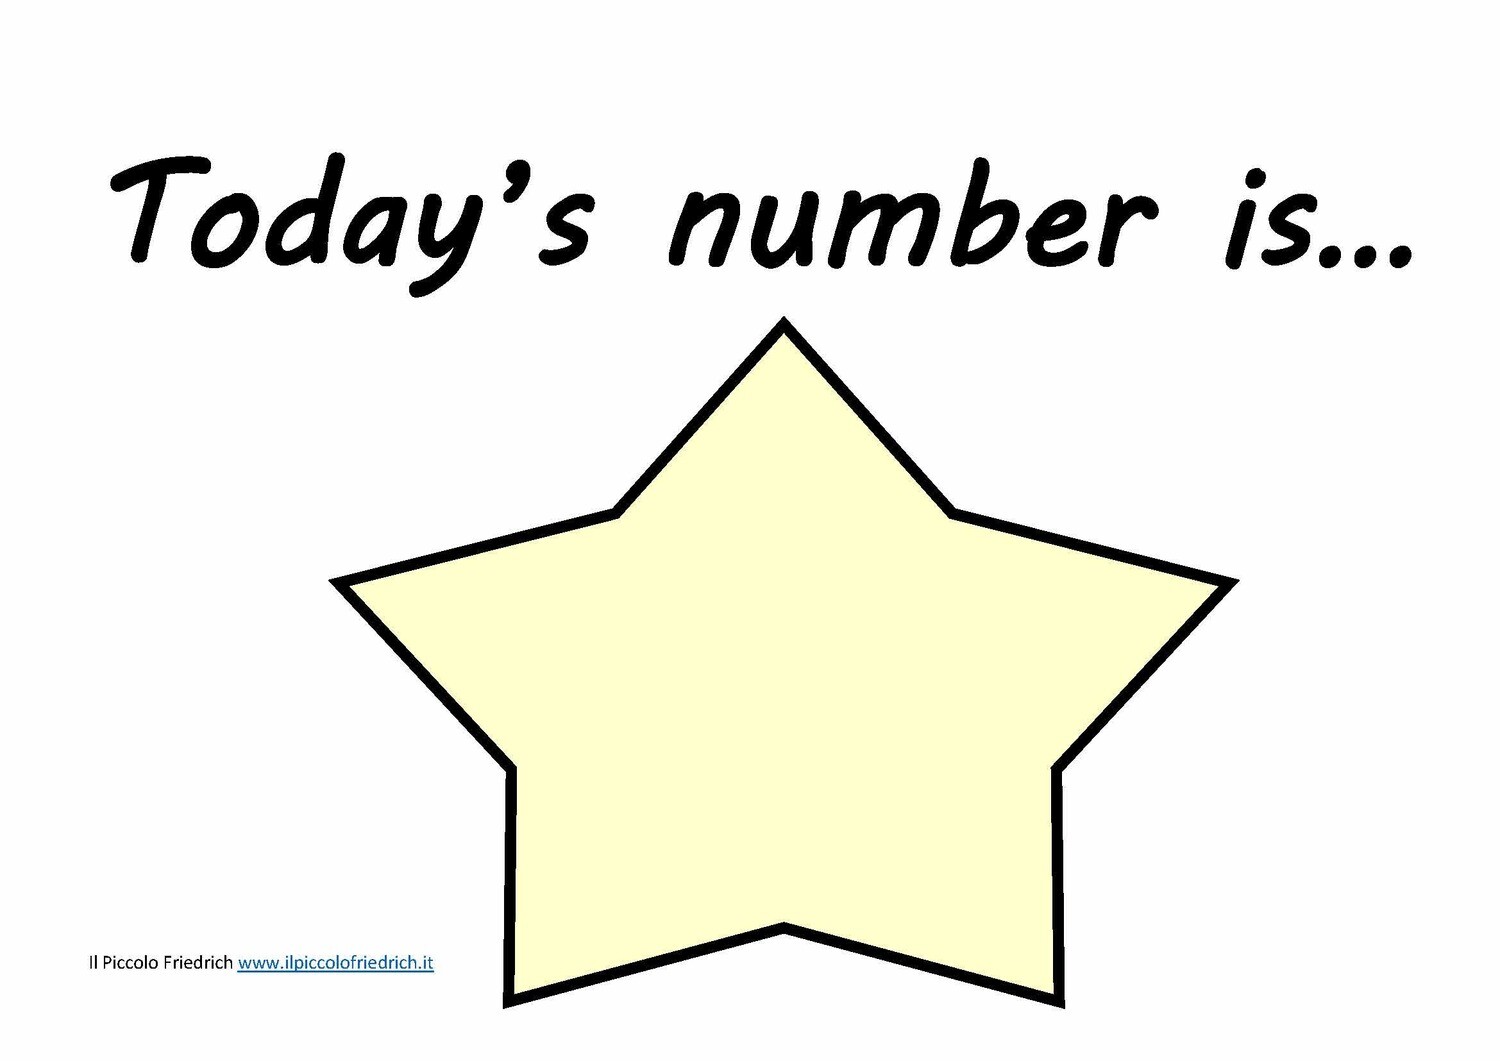 Today's number